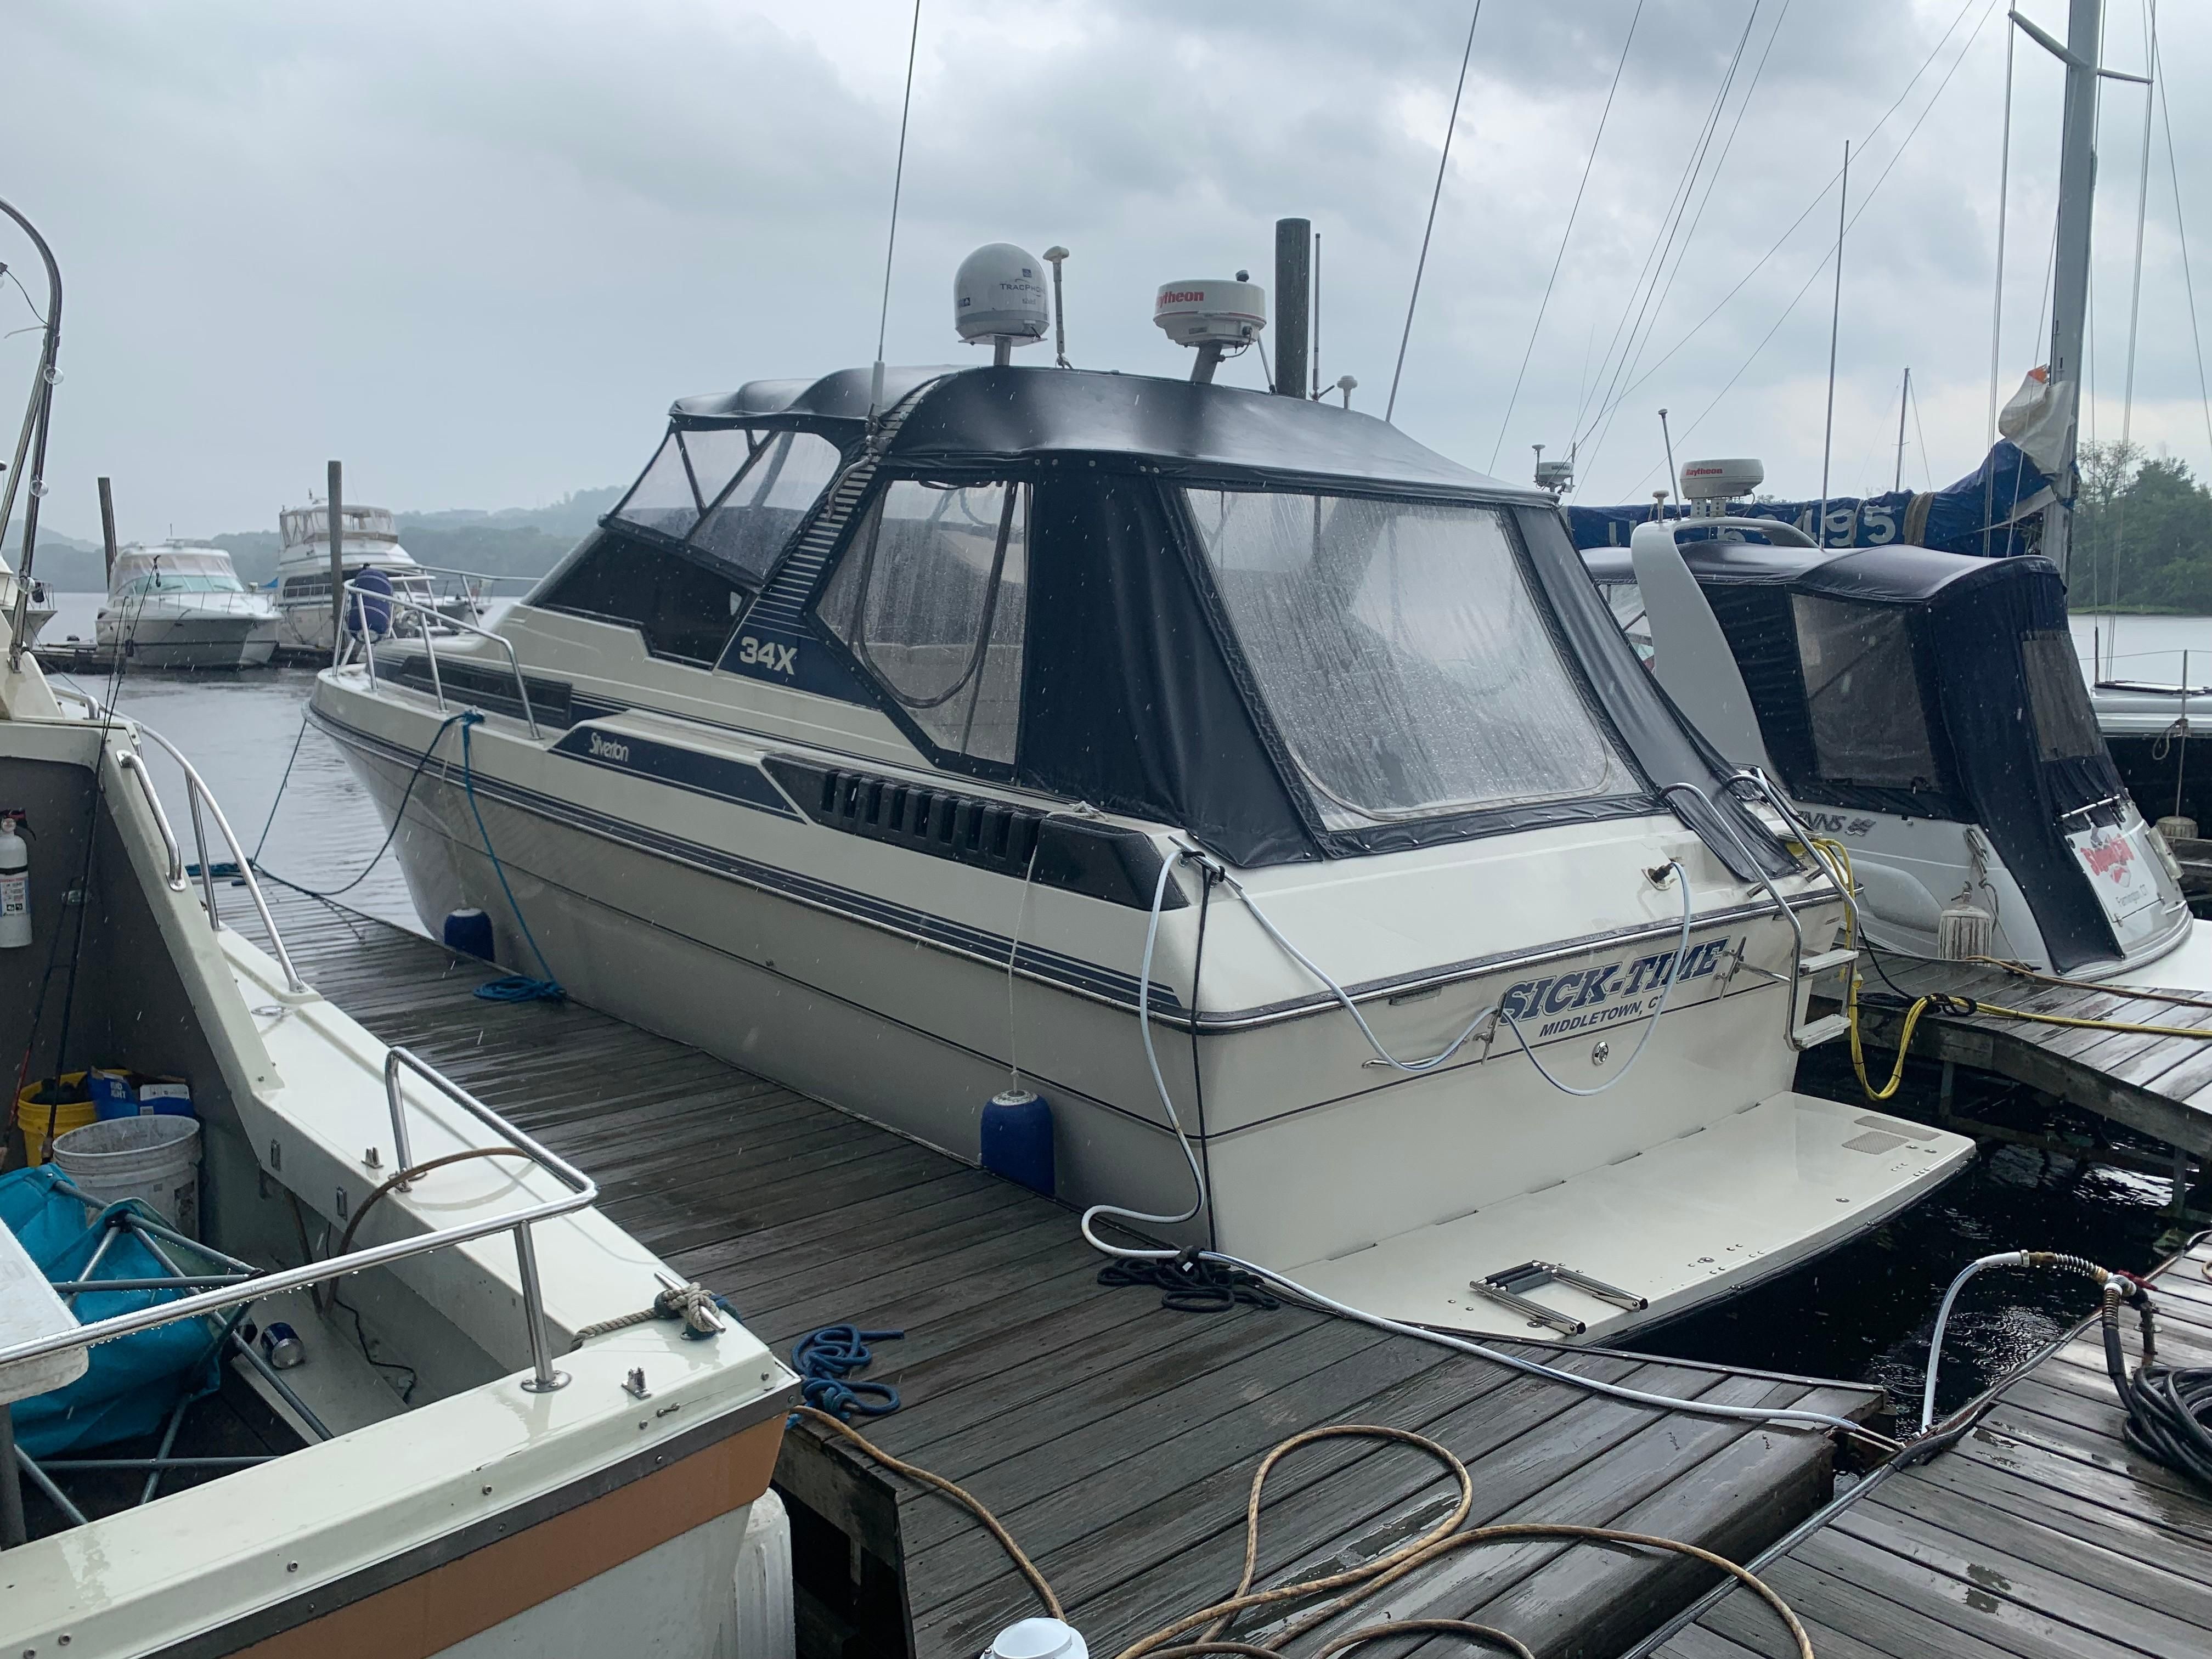 express 34 sailboat for sale